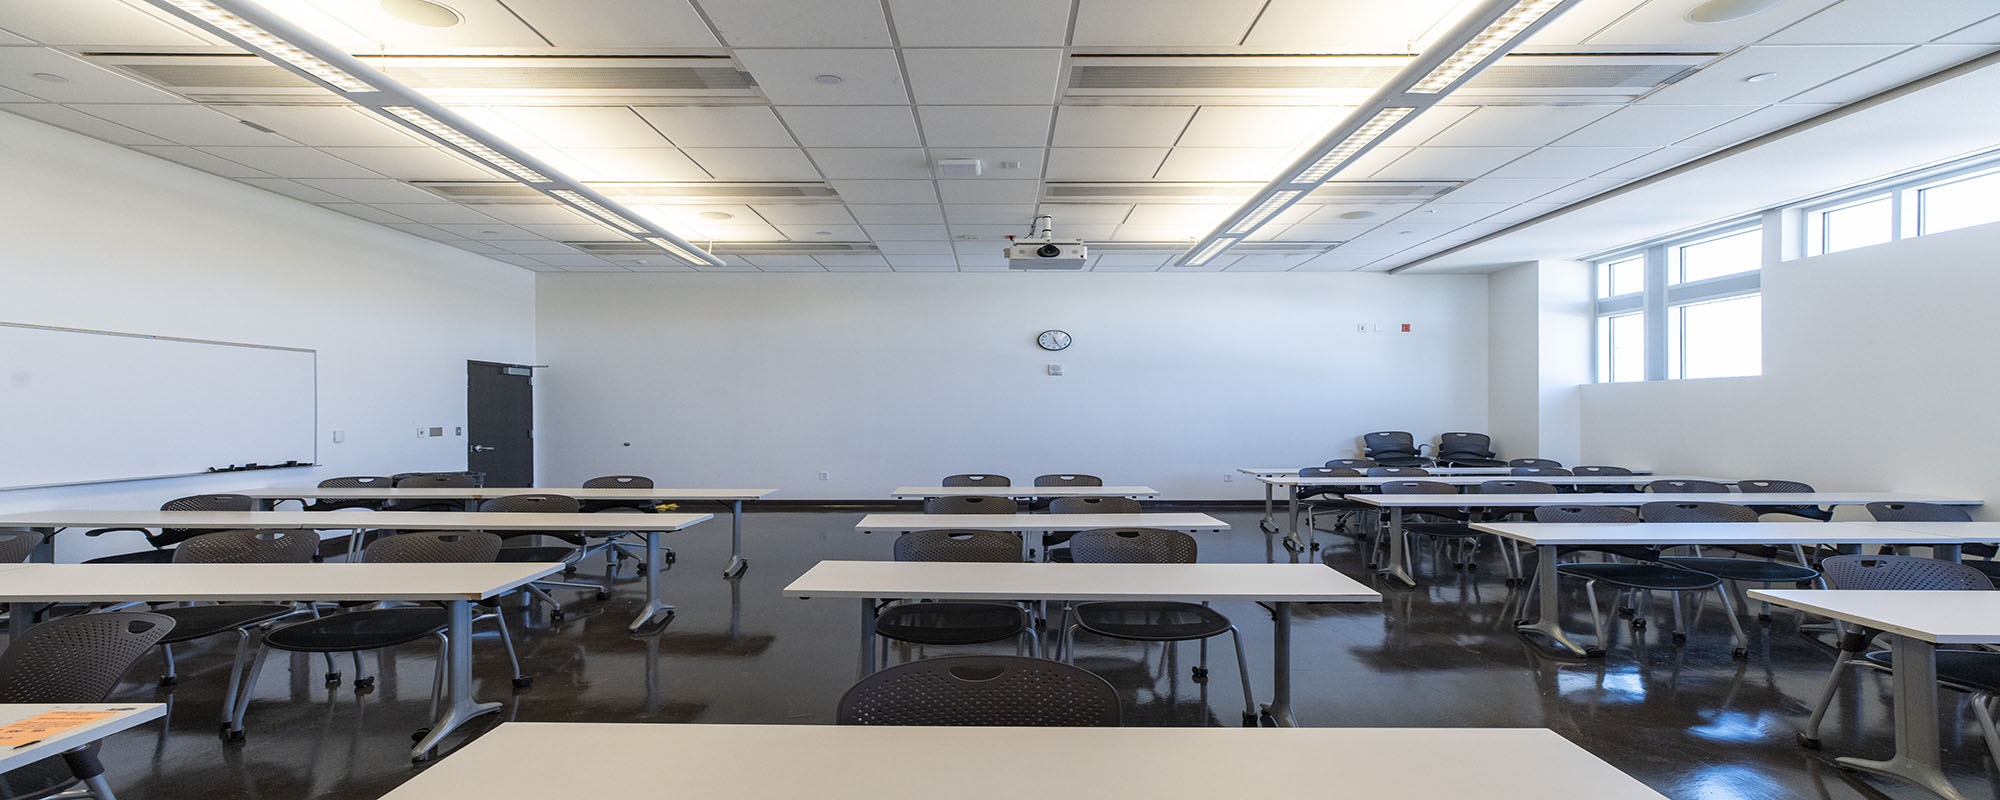 Front view of a UNLV classroom.